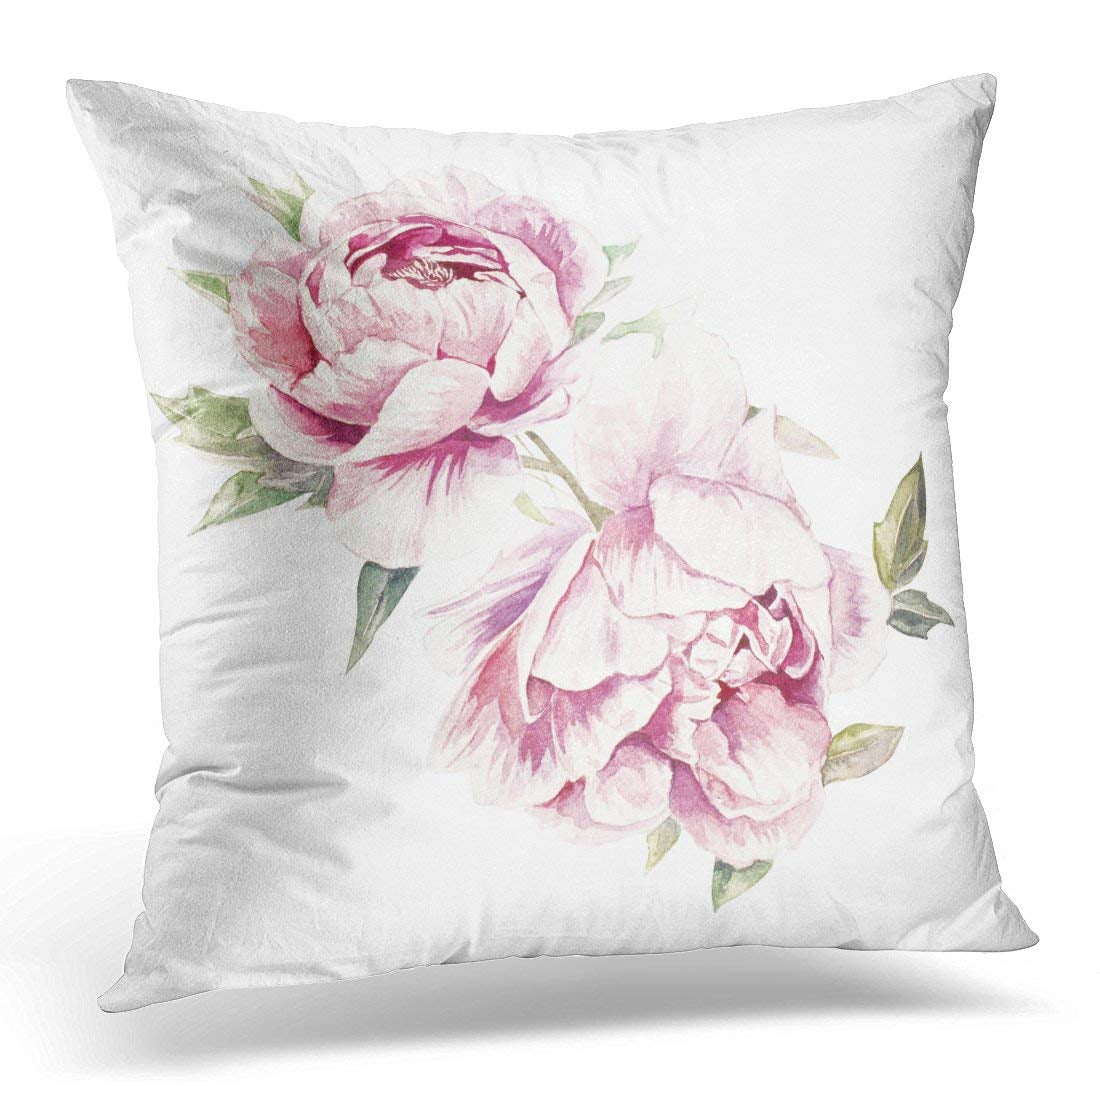 New Cotton Linen Pillow Cases Printing Peony Red Flower Cushion Cover Home Decor 